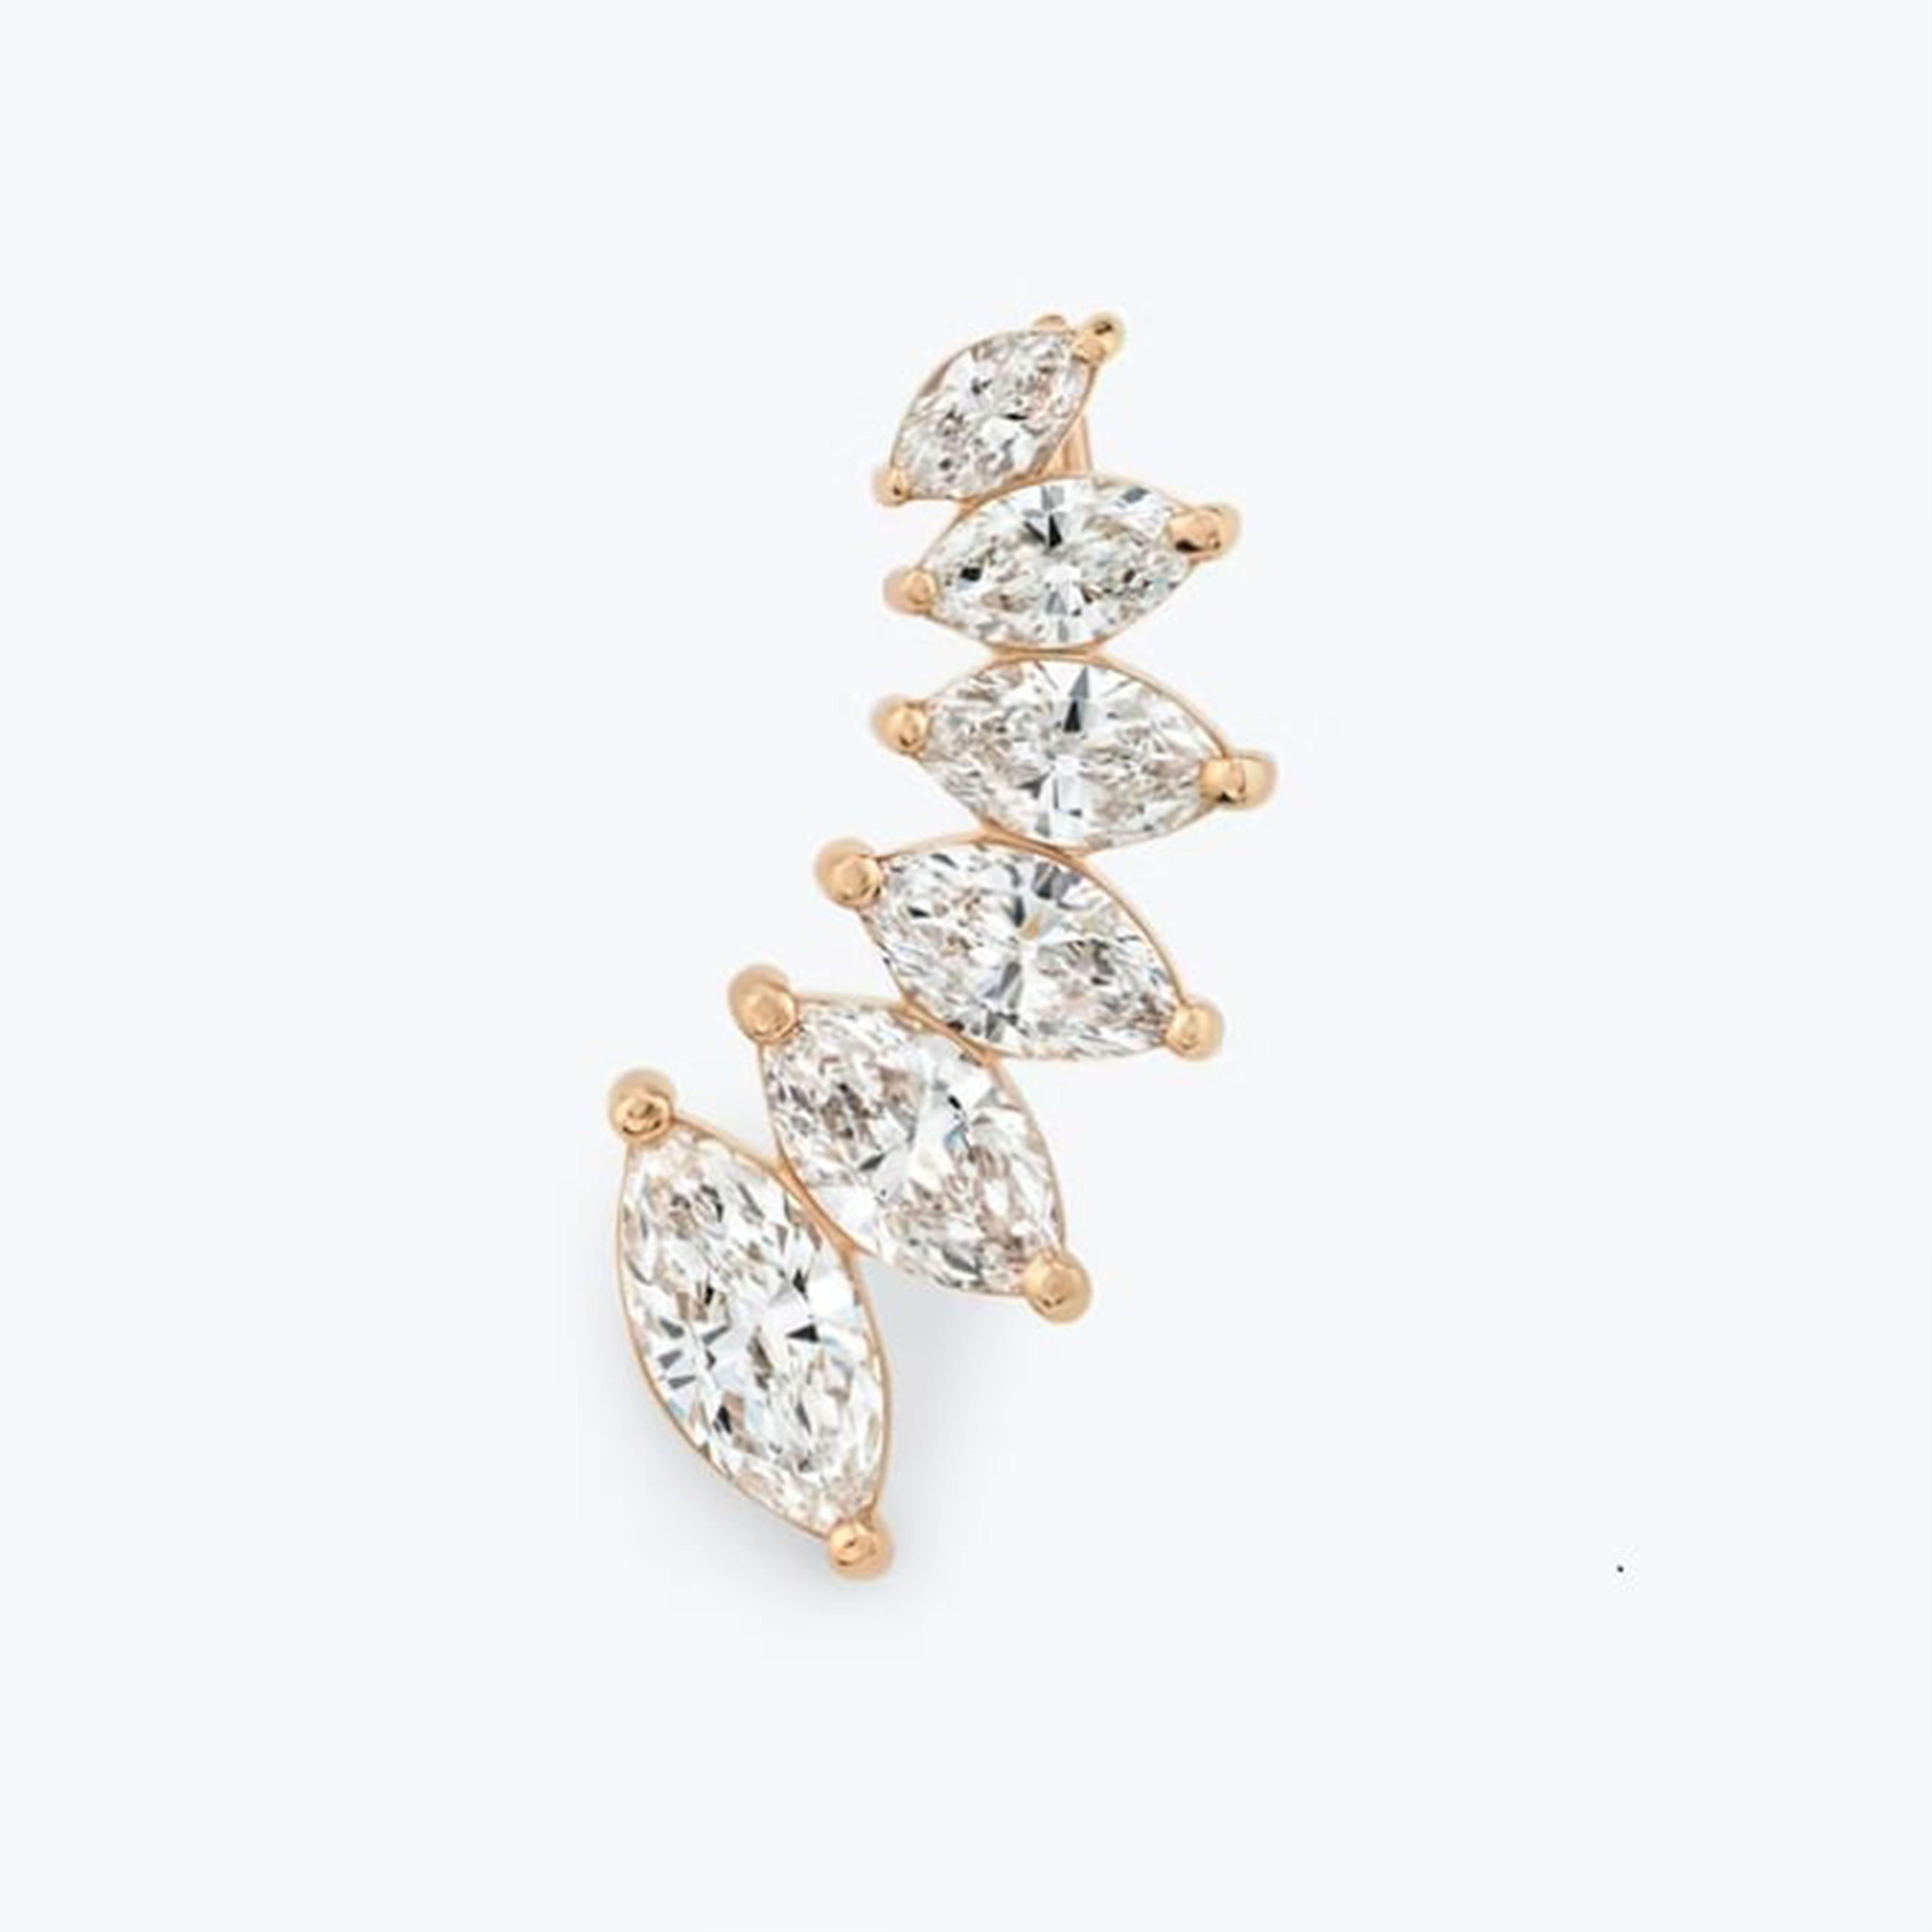 This exclusive piece will add a hint of luxury to your wardrobe, complete with a marquise-cut crystal feature, giving it an extra touch of glam. Wear it for a special occasion to shine the night away.

Earring Information
Natural Diamond
Metal